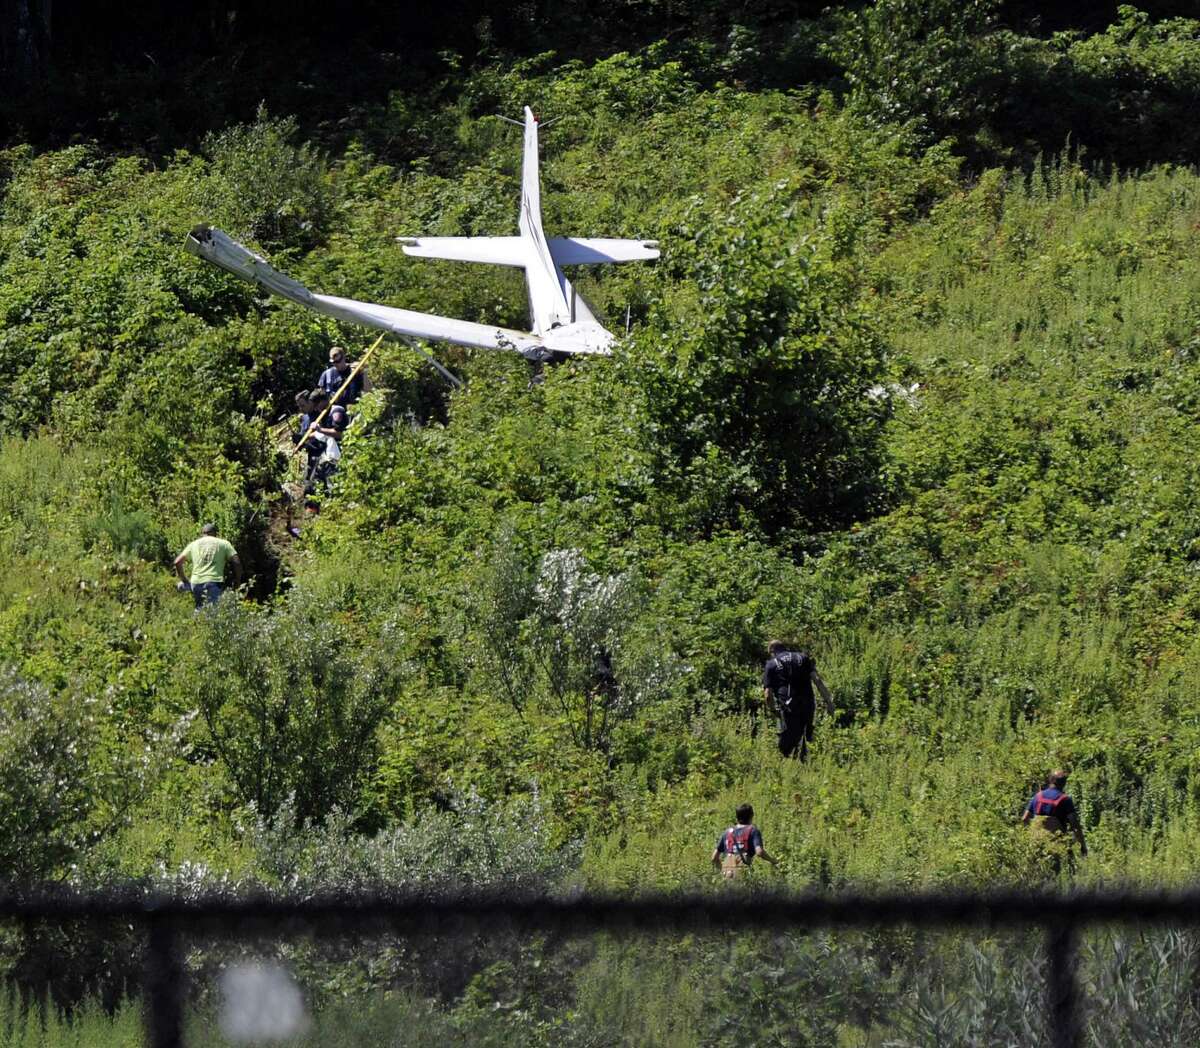 Three people are injured after a plane crashed about a mile from Danbury Airport Sunday morning, police confirmed. The crash occured off Miry Brook Road near the Dog Park around 10:30 a.m, July 30, 2017